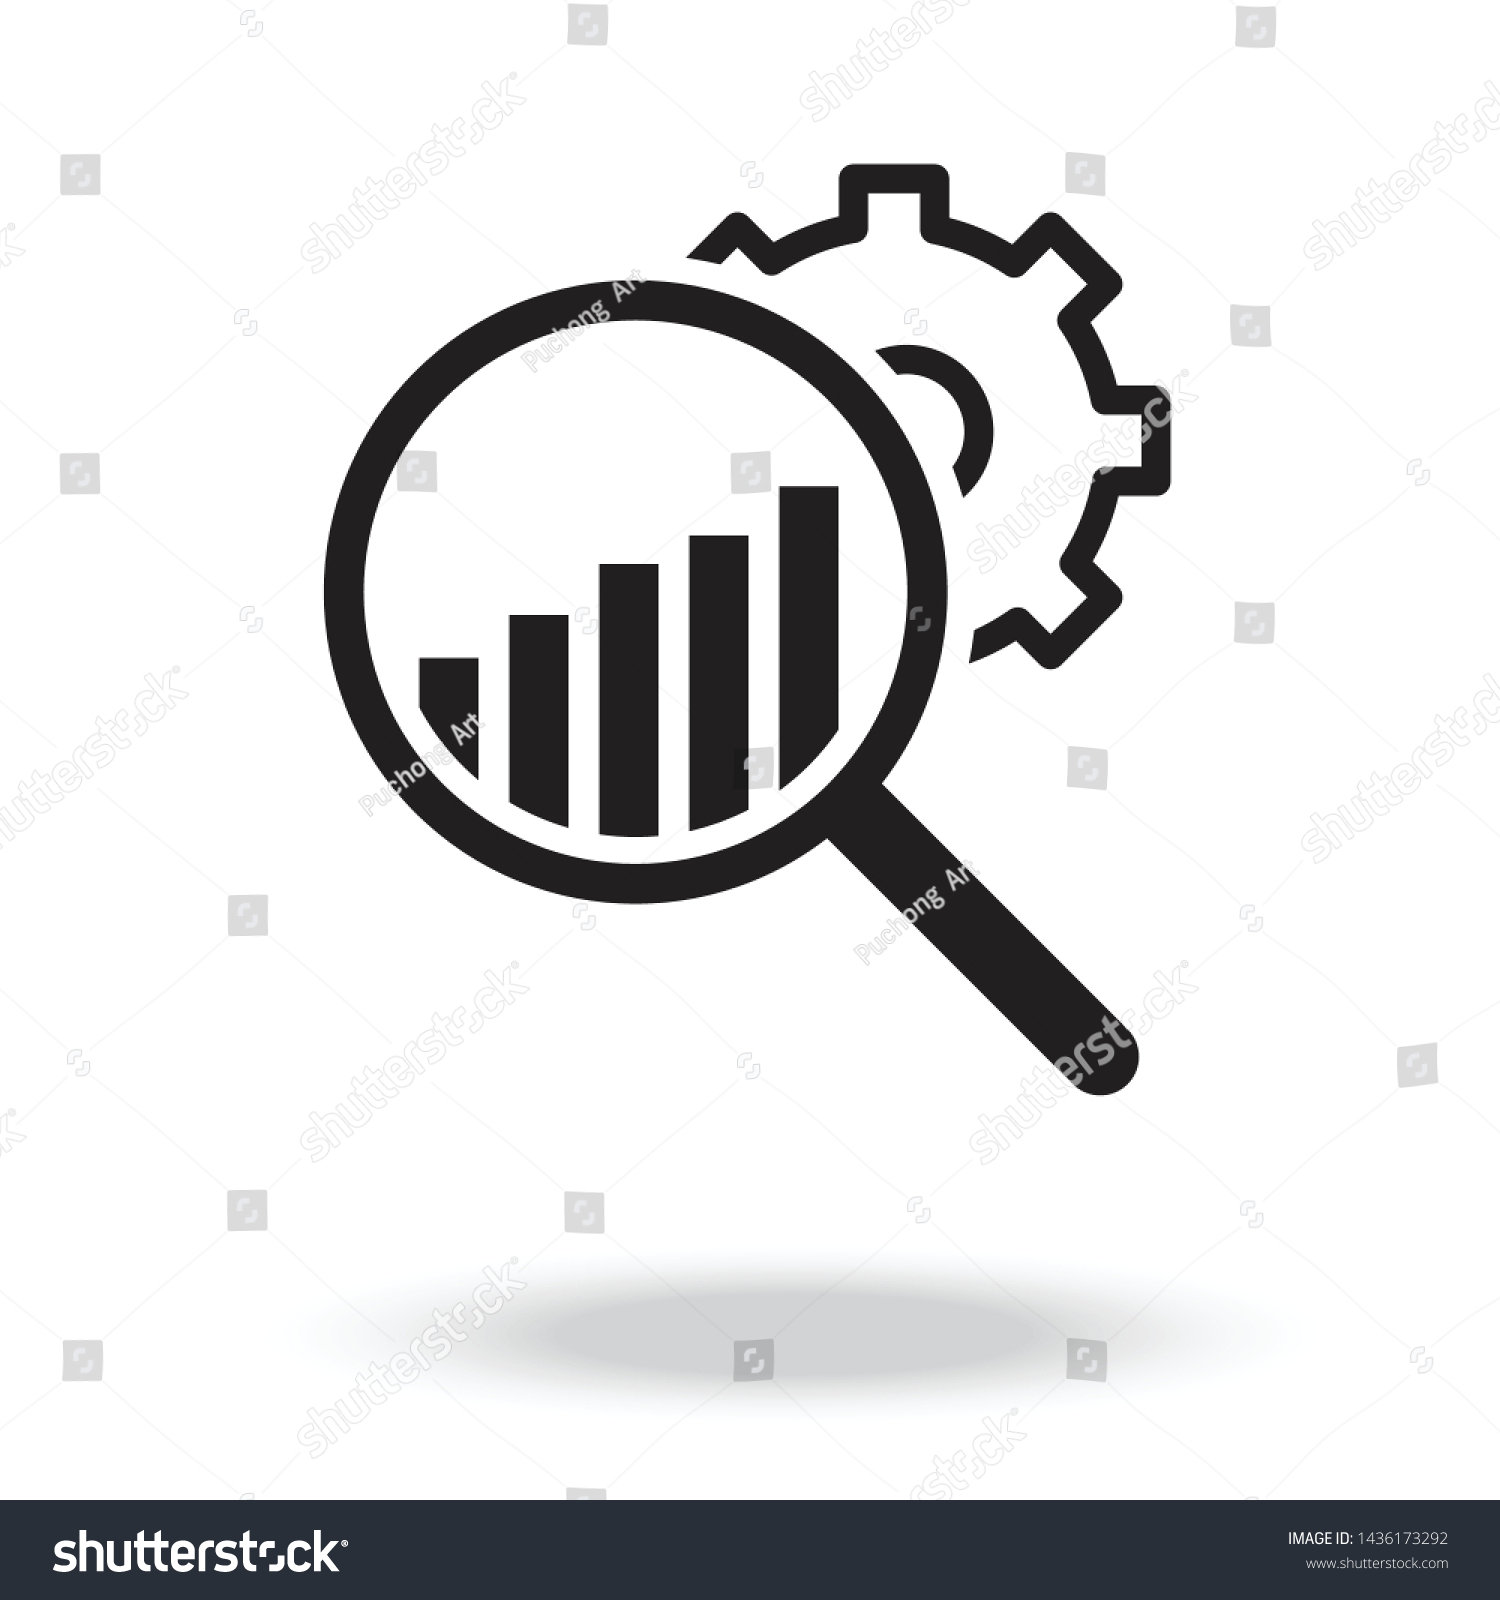 SVG of Market Research Icon vector.Analysis Icon.Research Icon svg